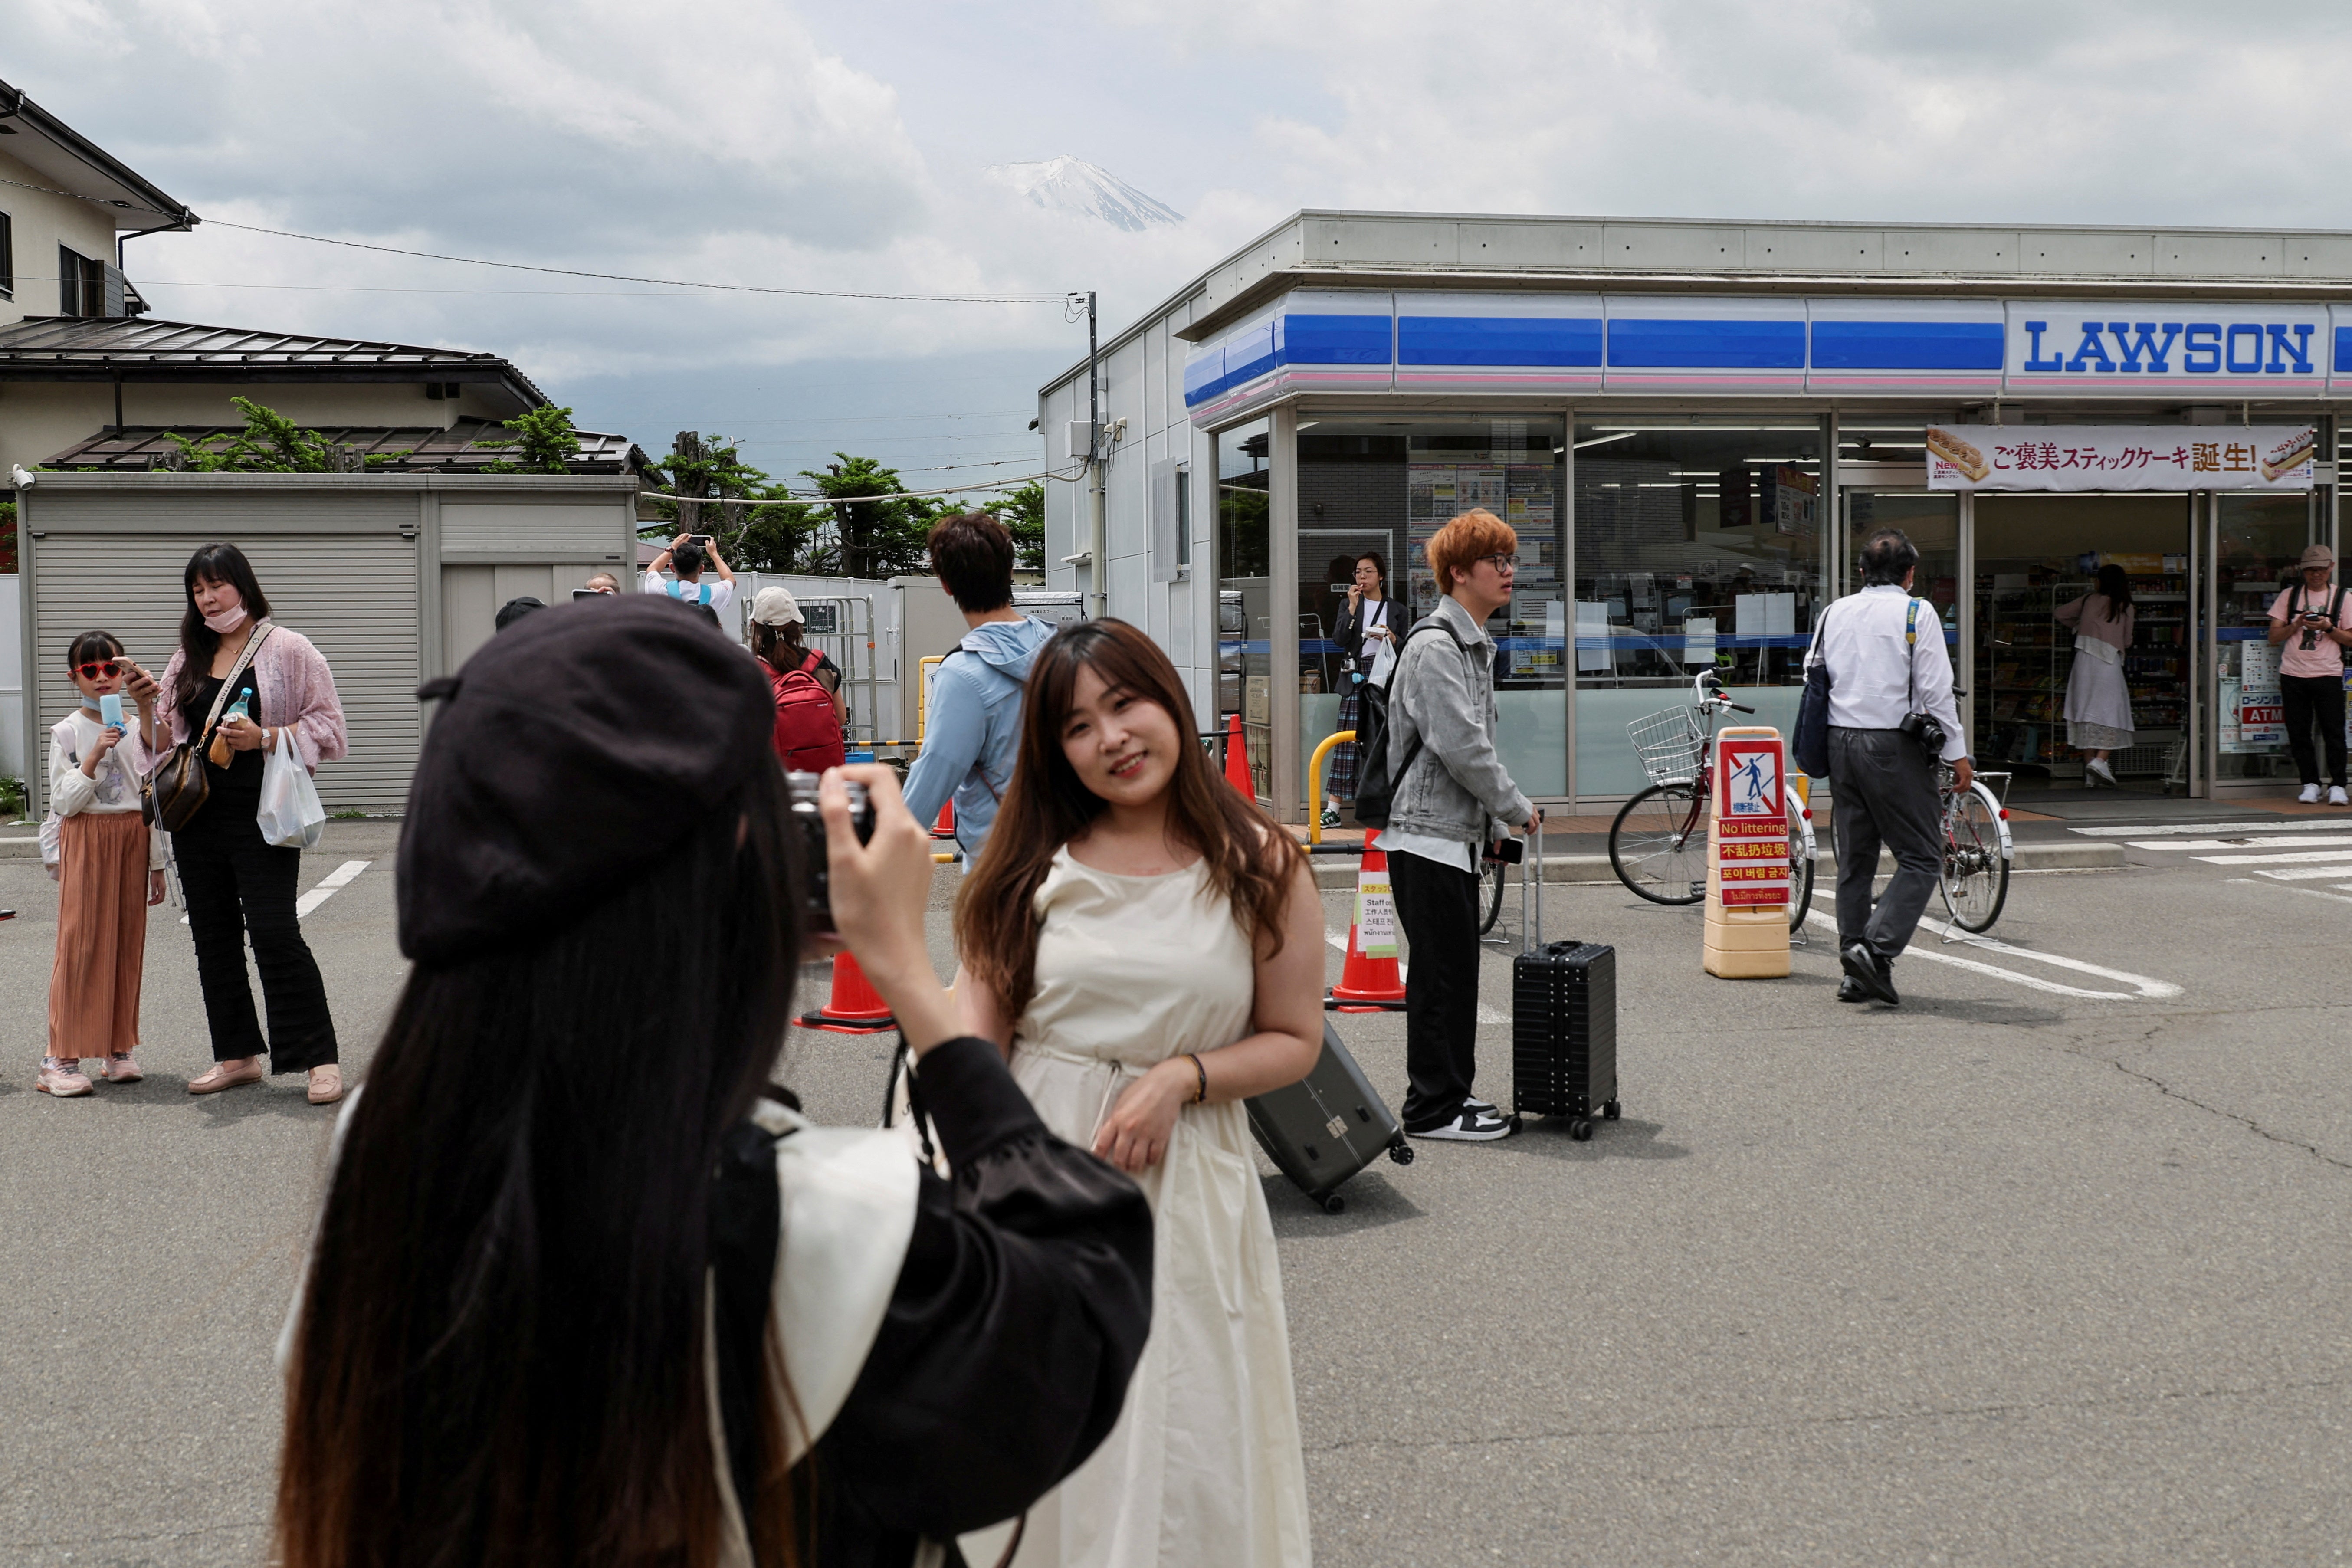 A tourist poses for a photo of Mount Fuji appearing over a convenience store after a barrier to block the popular tourist spot was installed, in Fujikawaguchiko